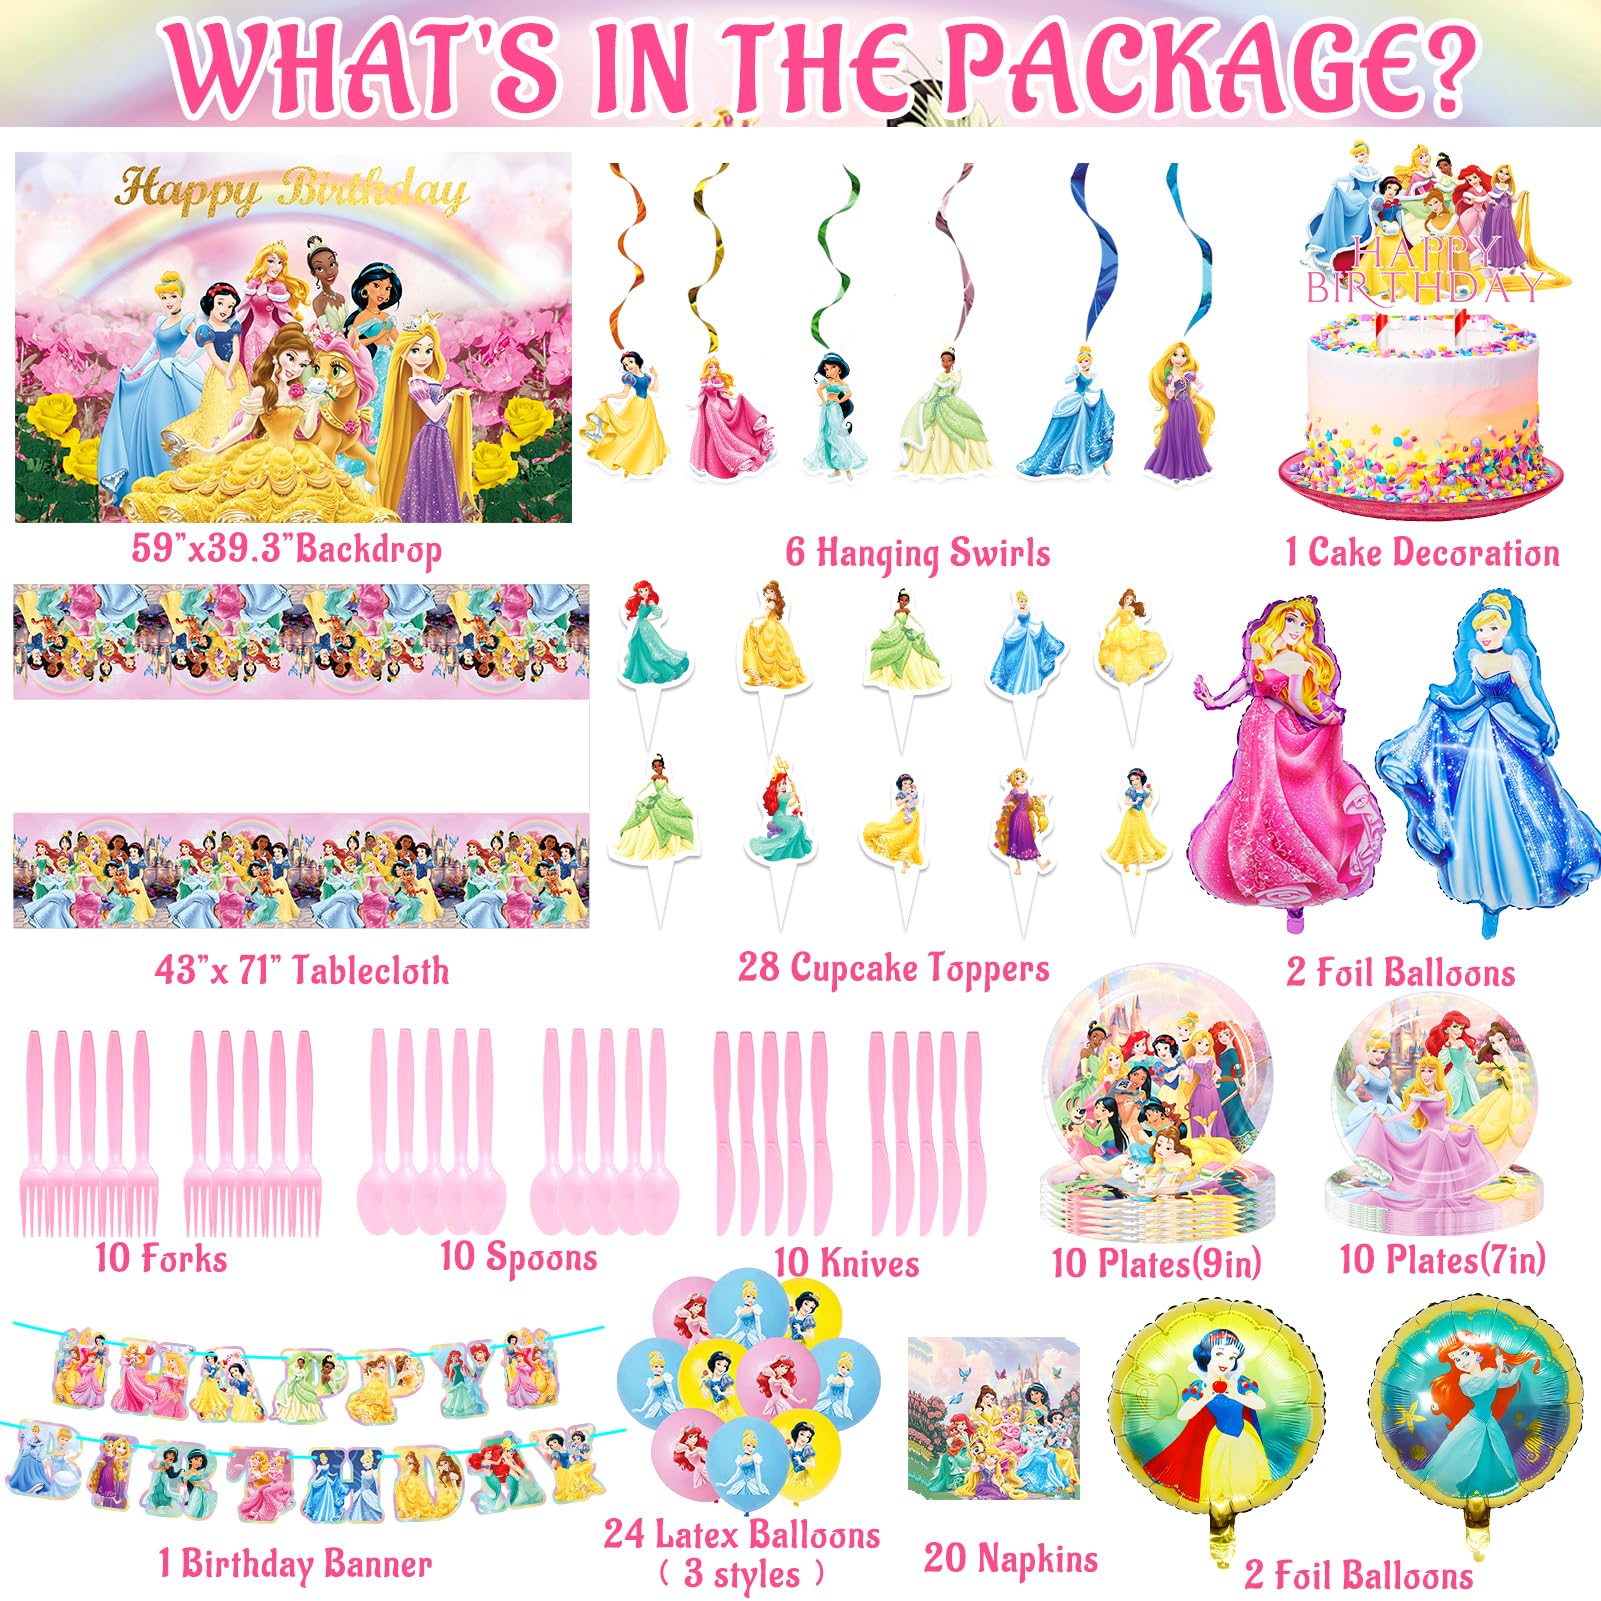 Princess Party Decorations - Princess Birthday Decorations include Banner Tablecloth Backdrop Ballons Cake Cupcake Toppers Tableware Haning Swirls, Princess Birthday Party Supplies